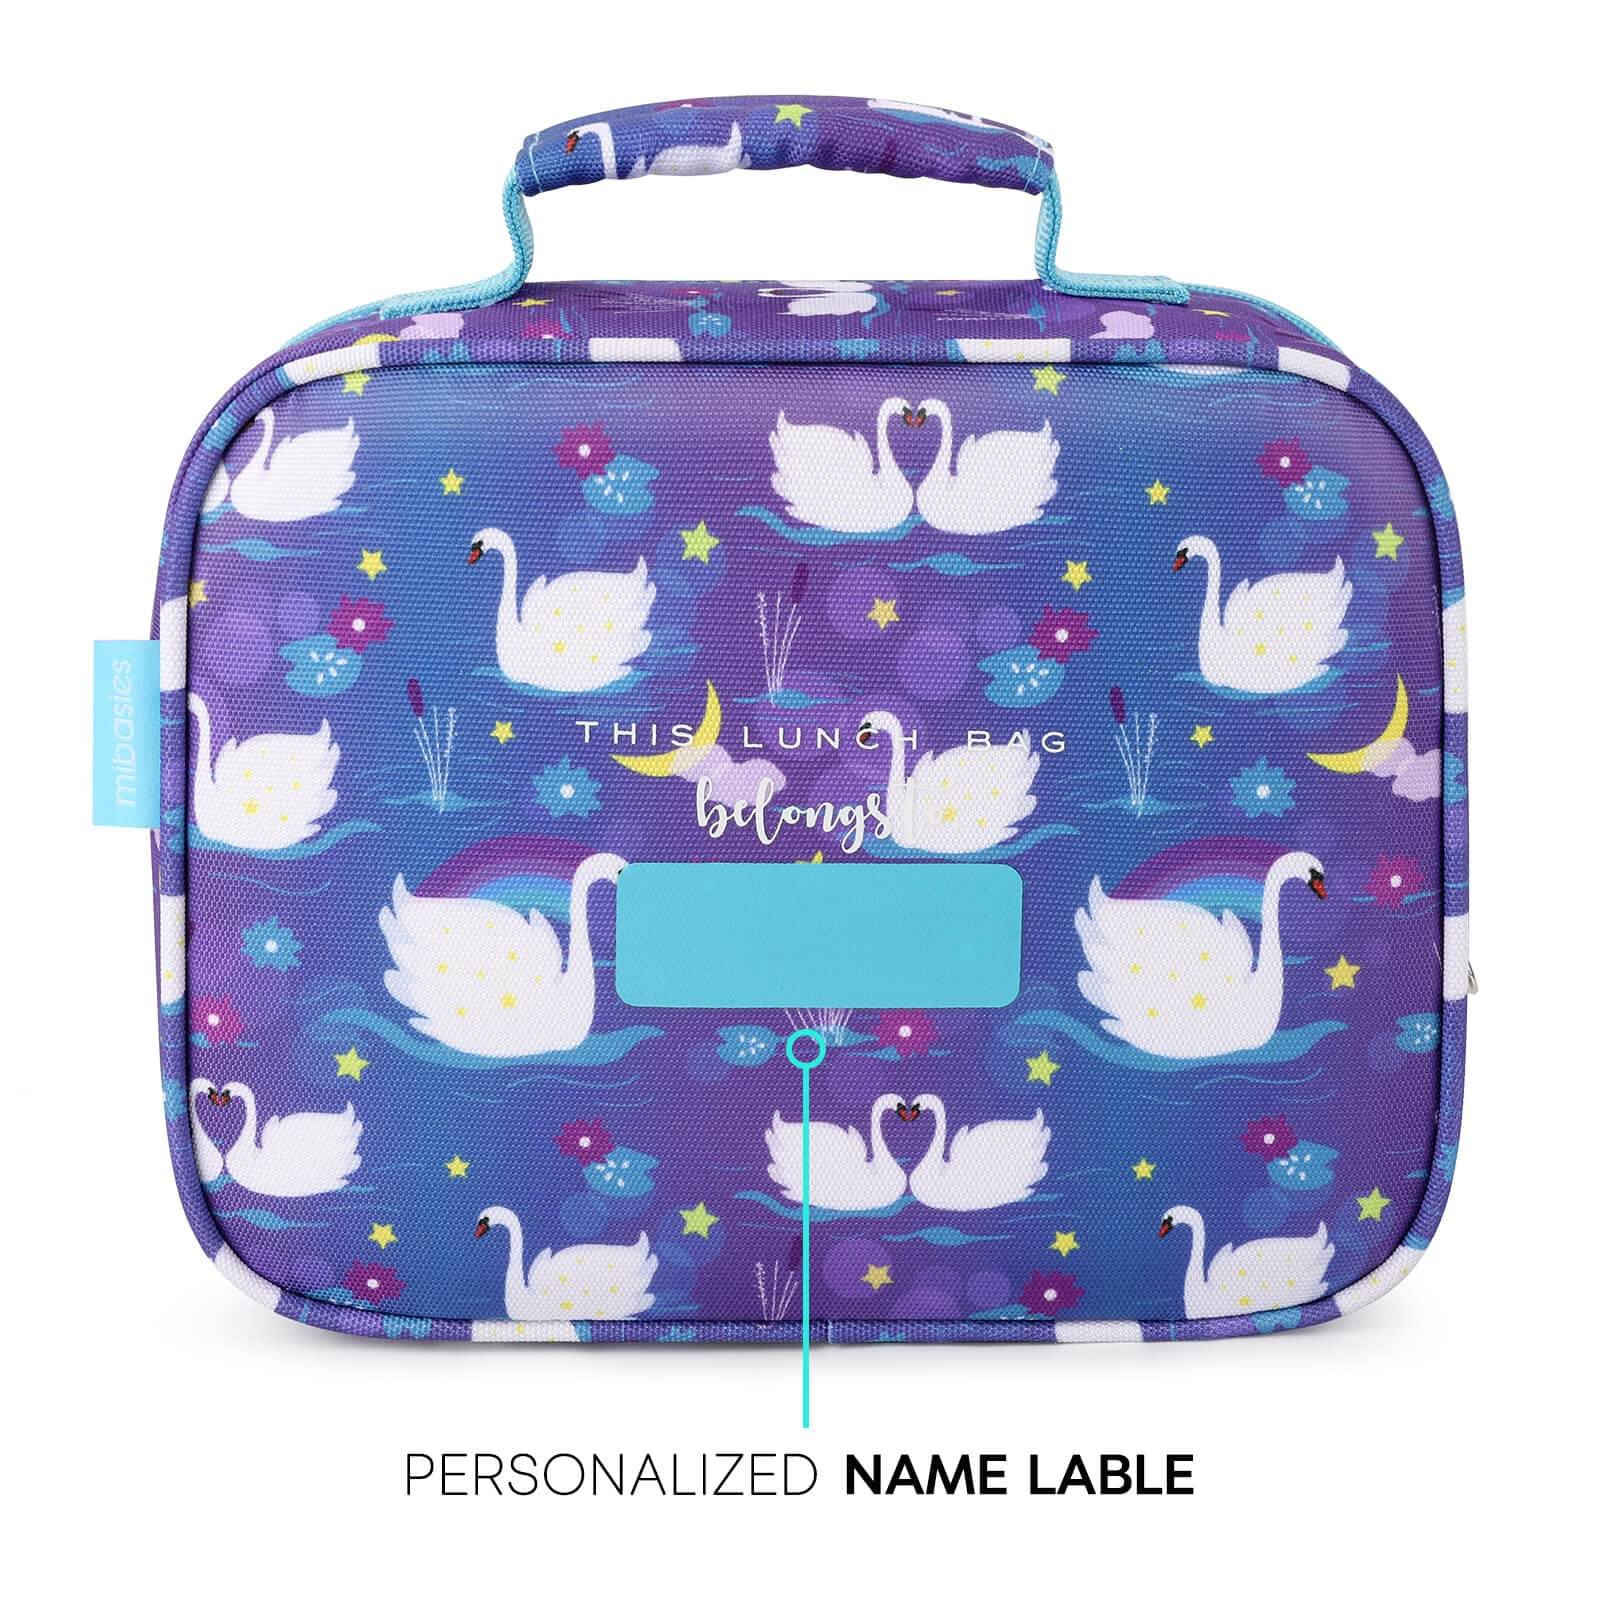 Minnie Mouse Insulated Lunch Bag Unicorn Stay Cool Purple with Shoulder Strap